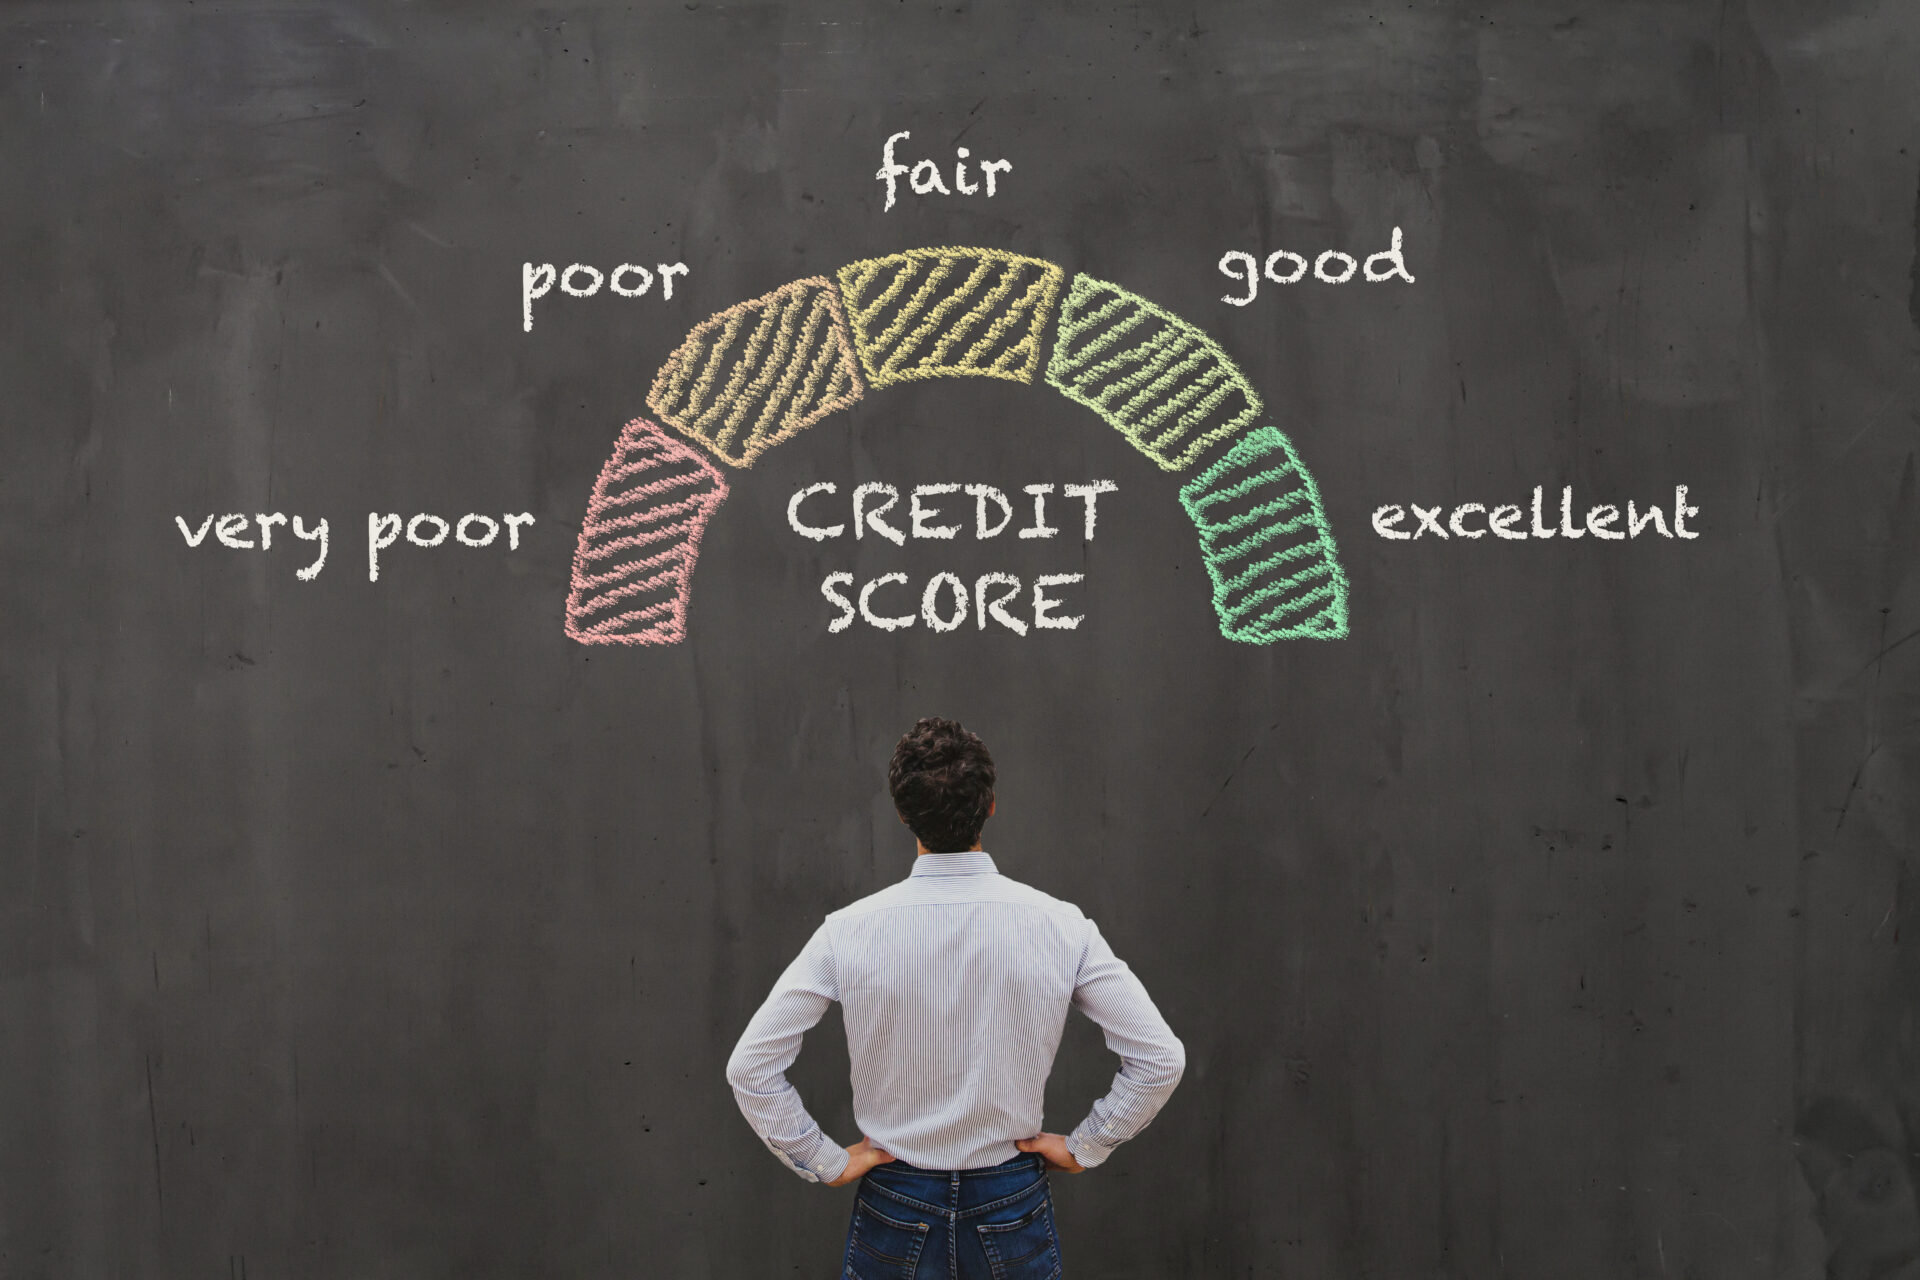 Man looking at chalkboard depicting credit scores ranging from poor to excellent.